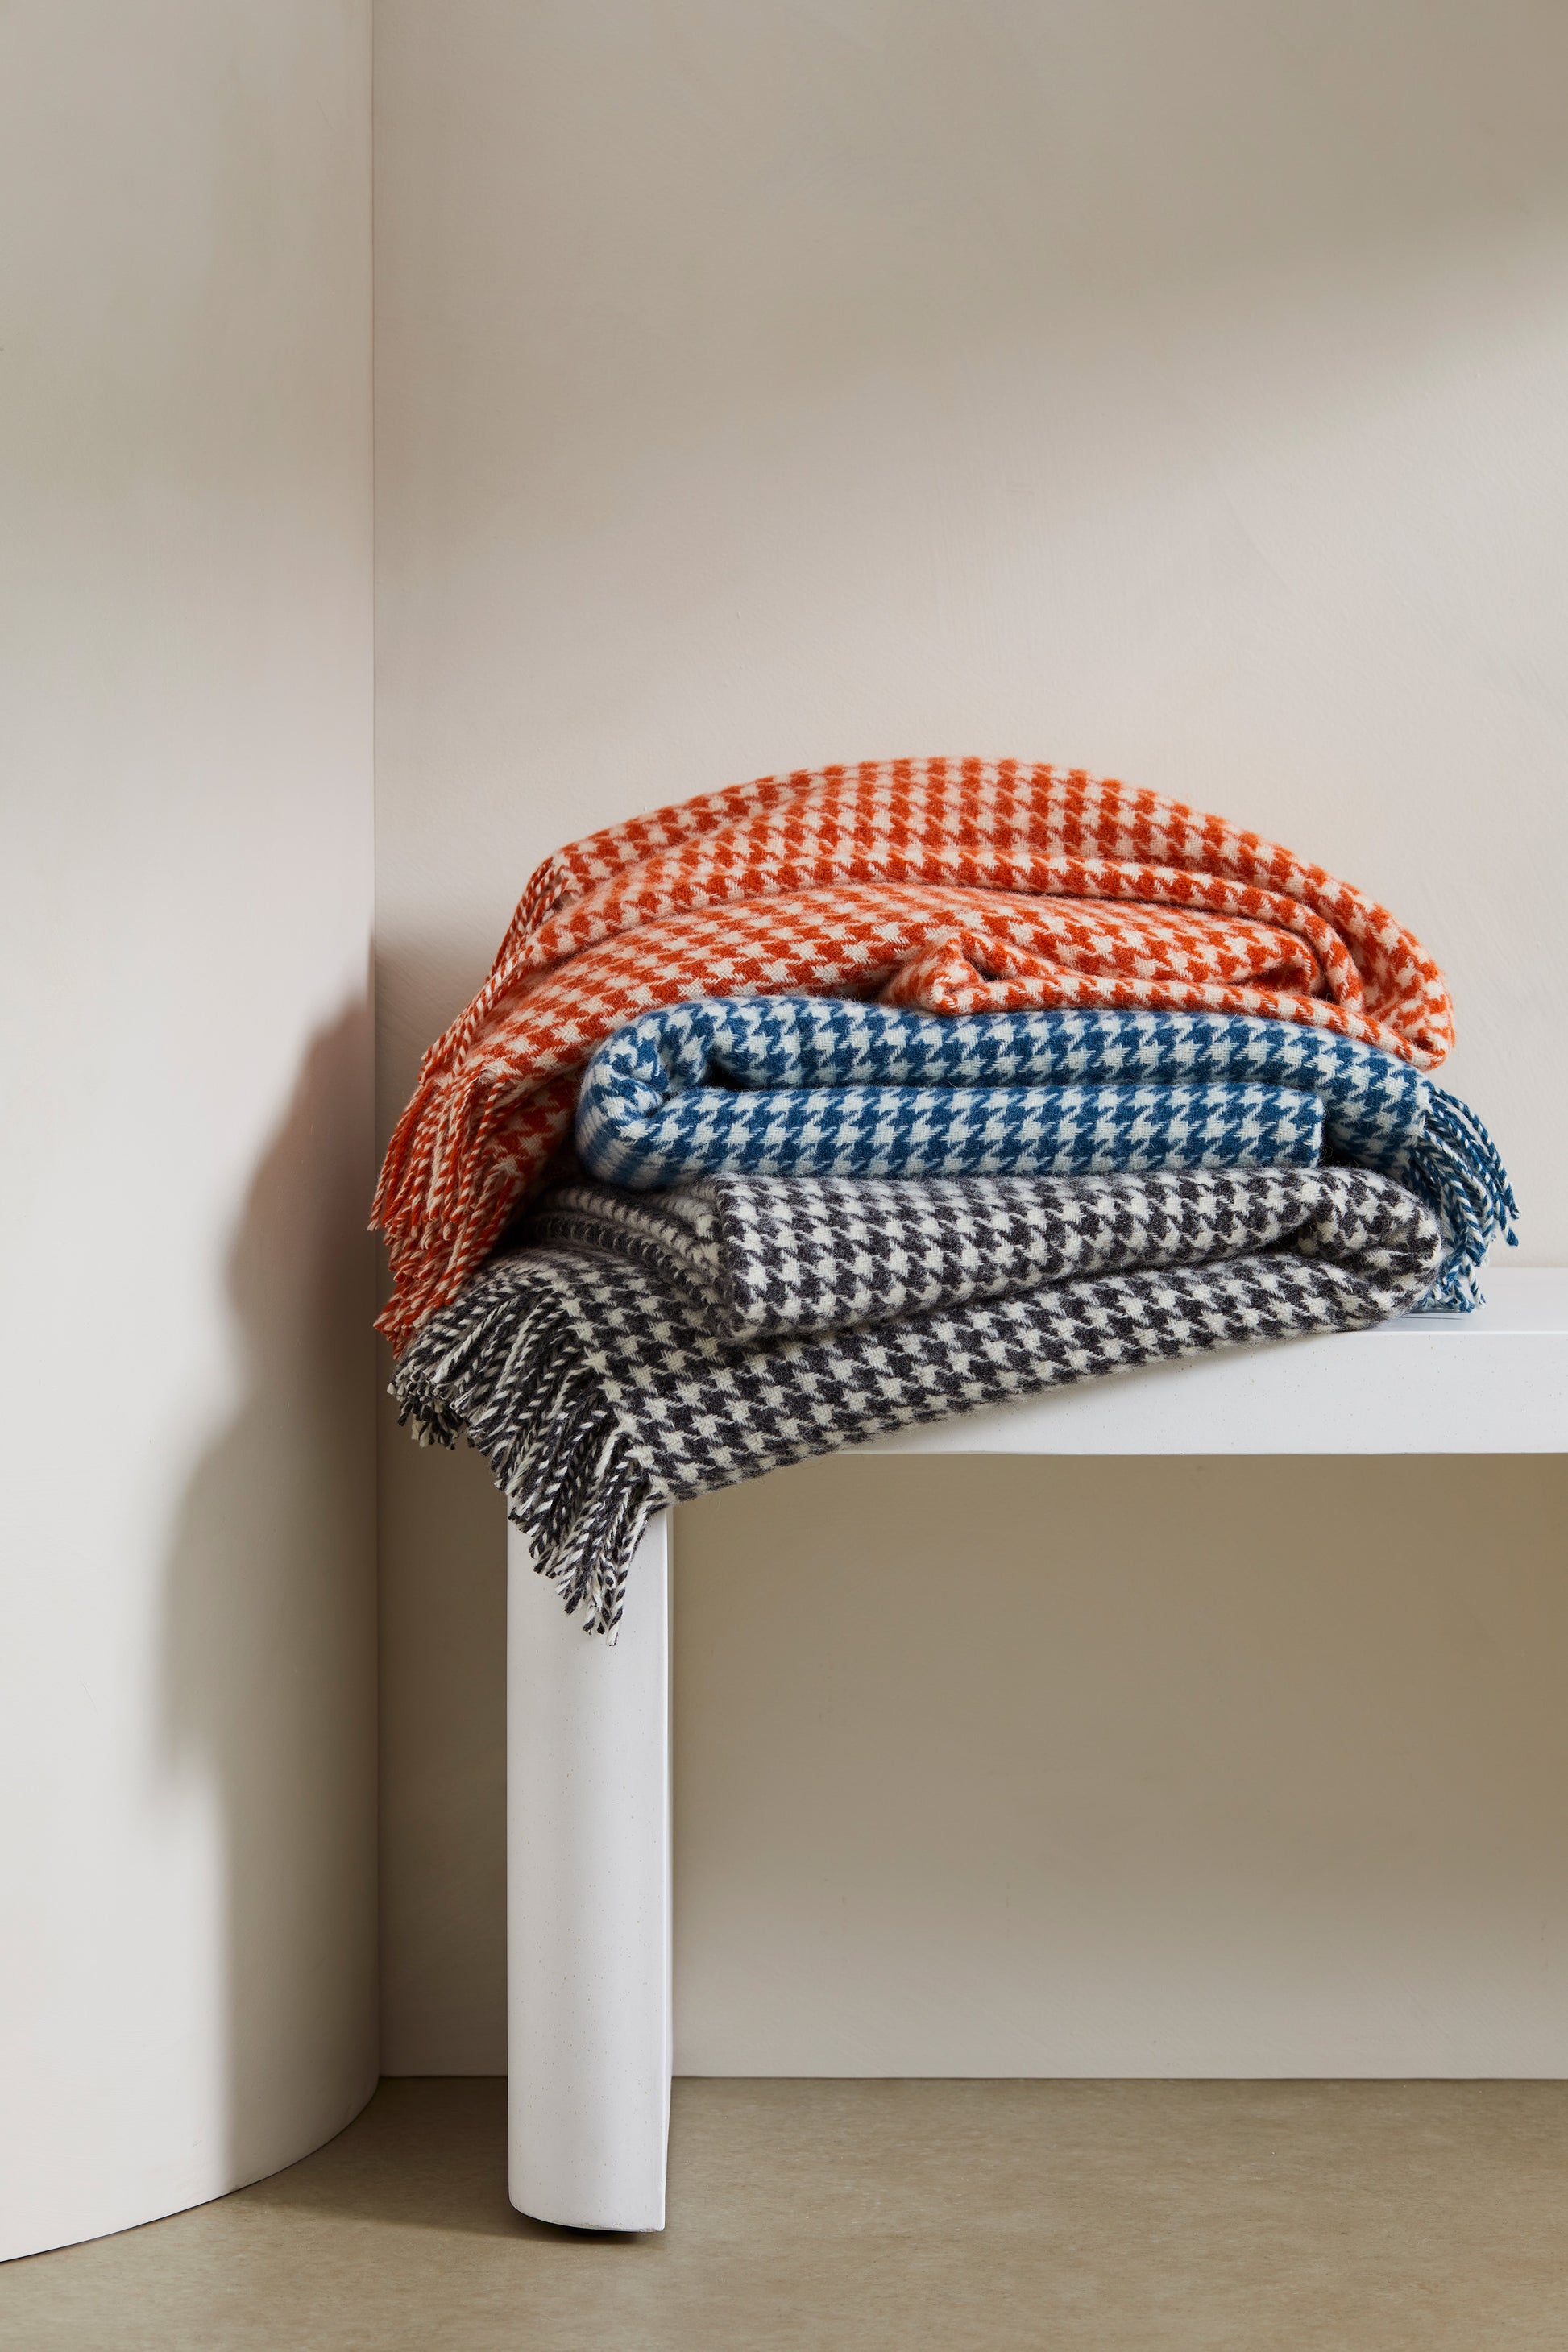 Huxter wool throw from Weave Home, houndstooth check in a stack